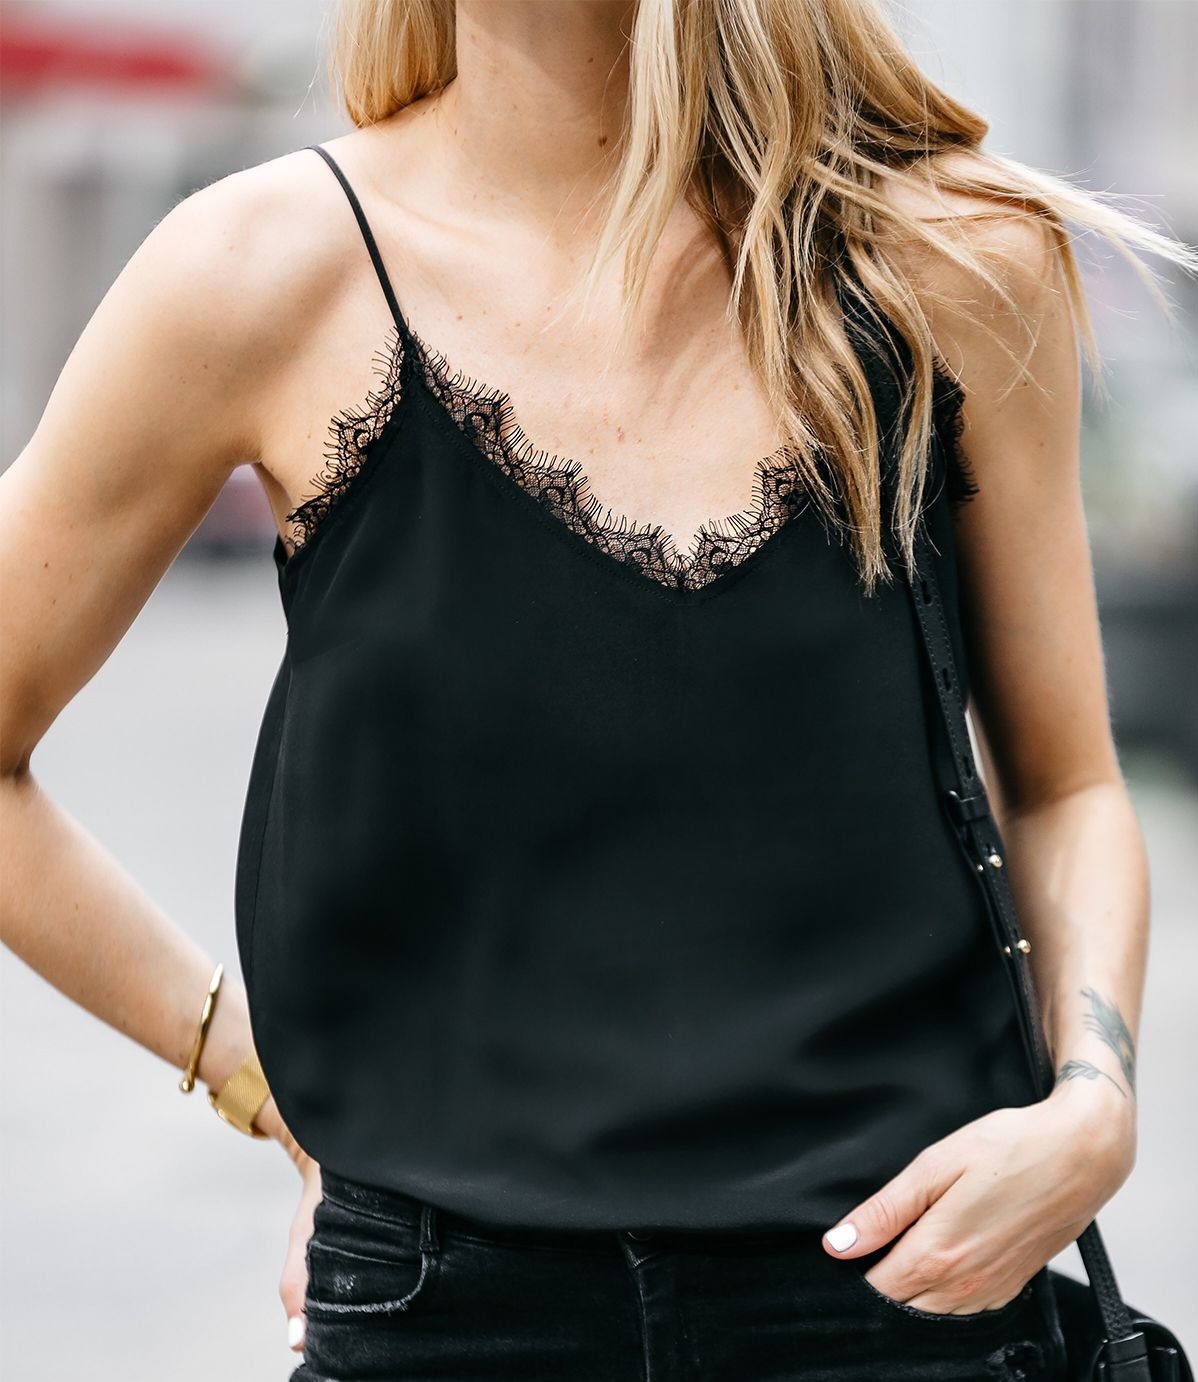 A CHIC WAY TO WEAR A LACE CAMISOLE - Fashion Jackson